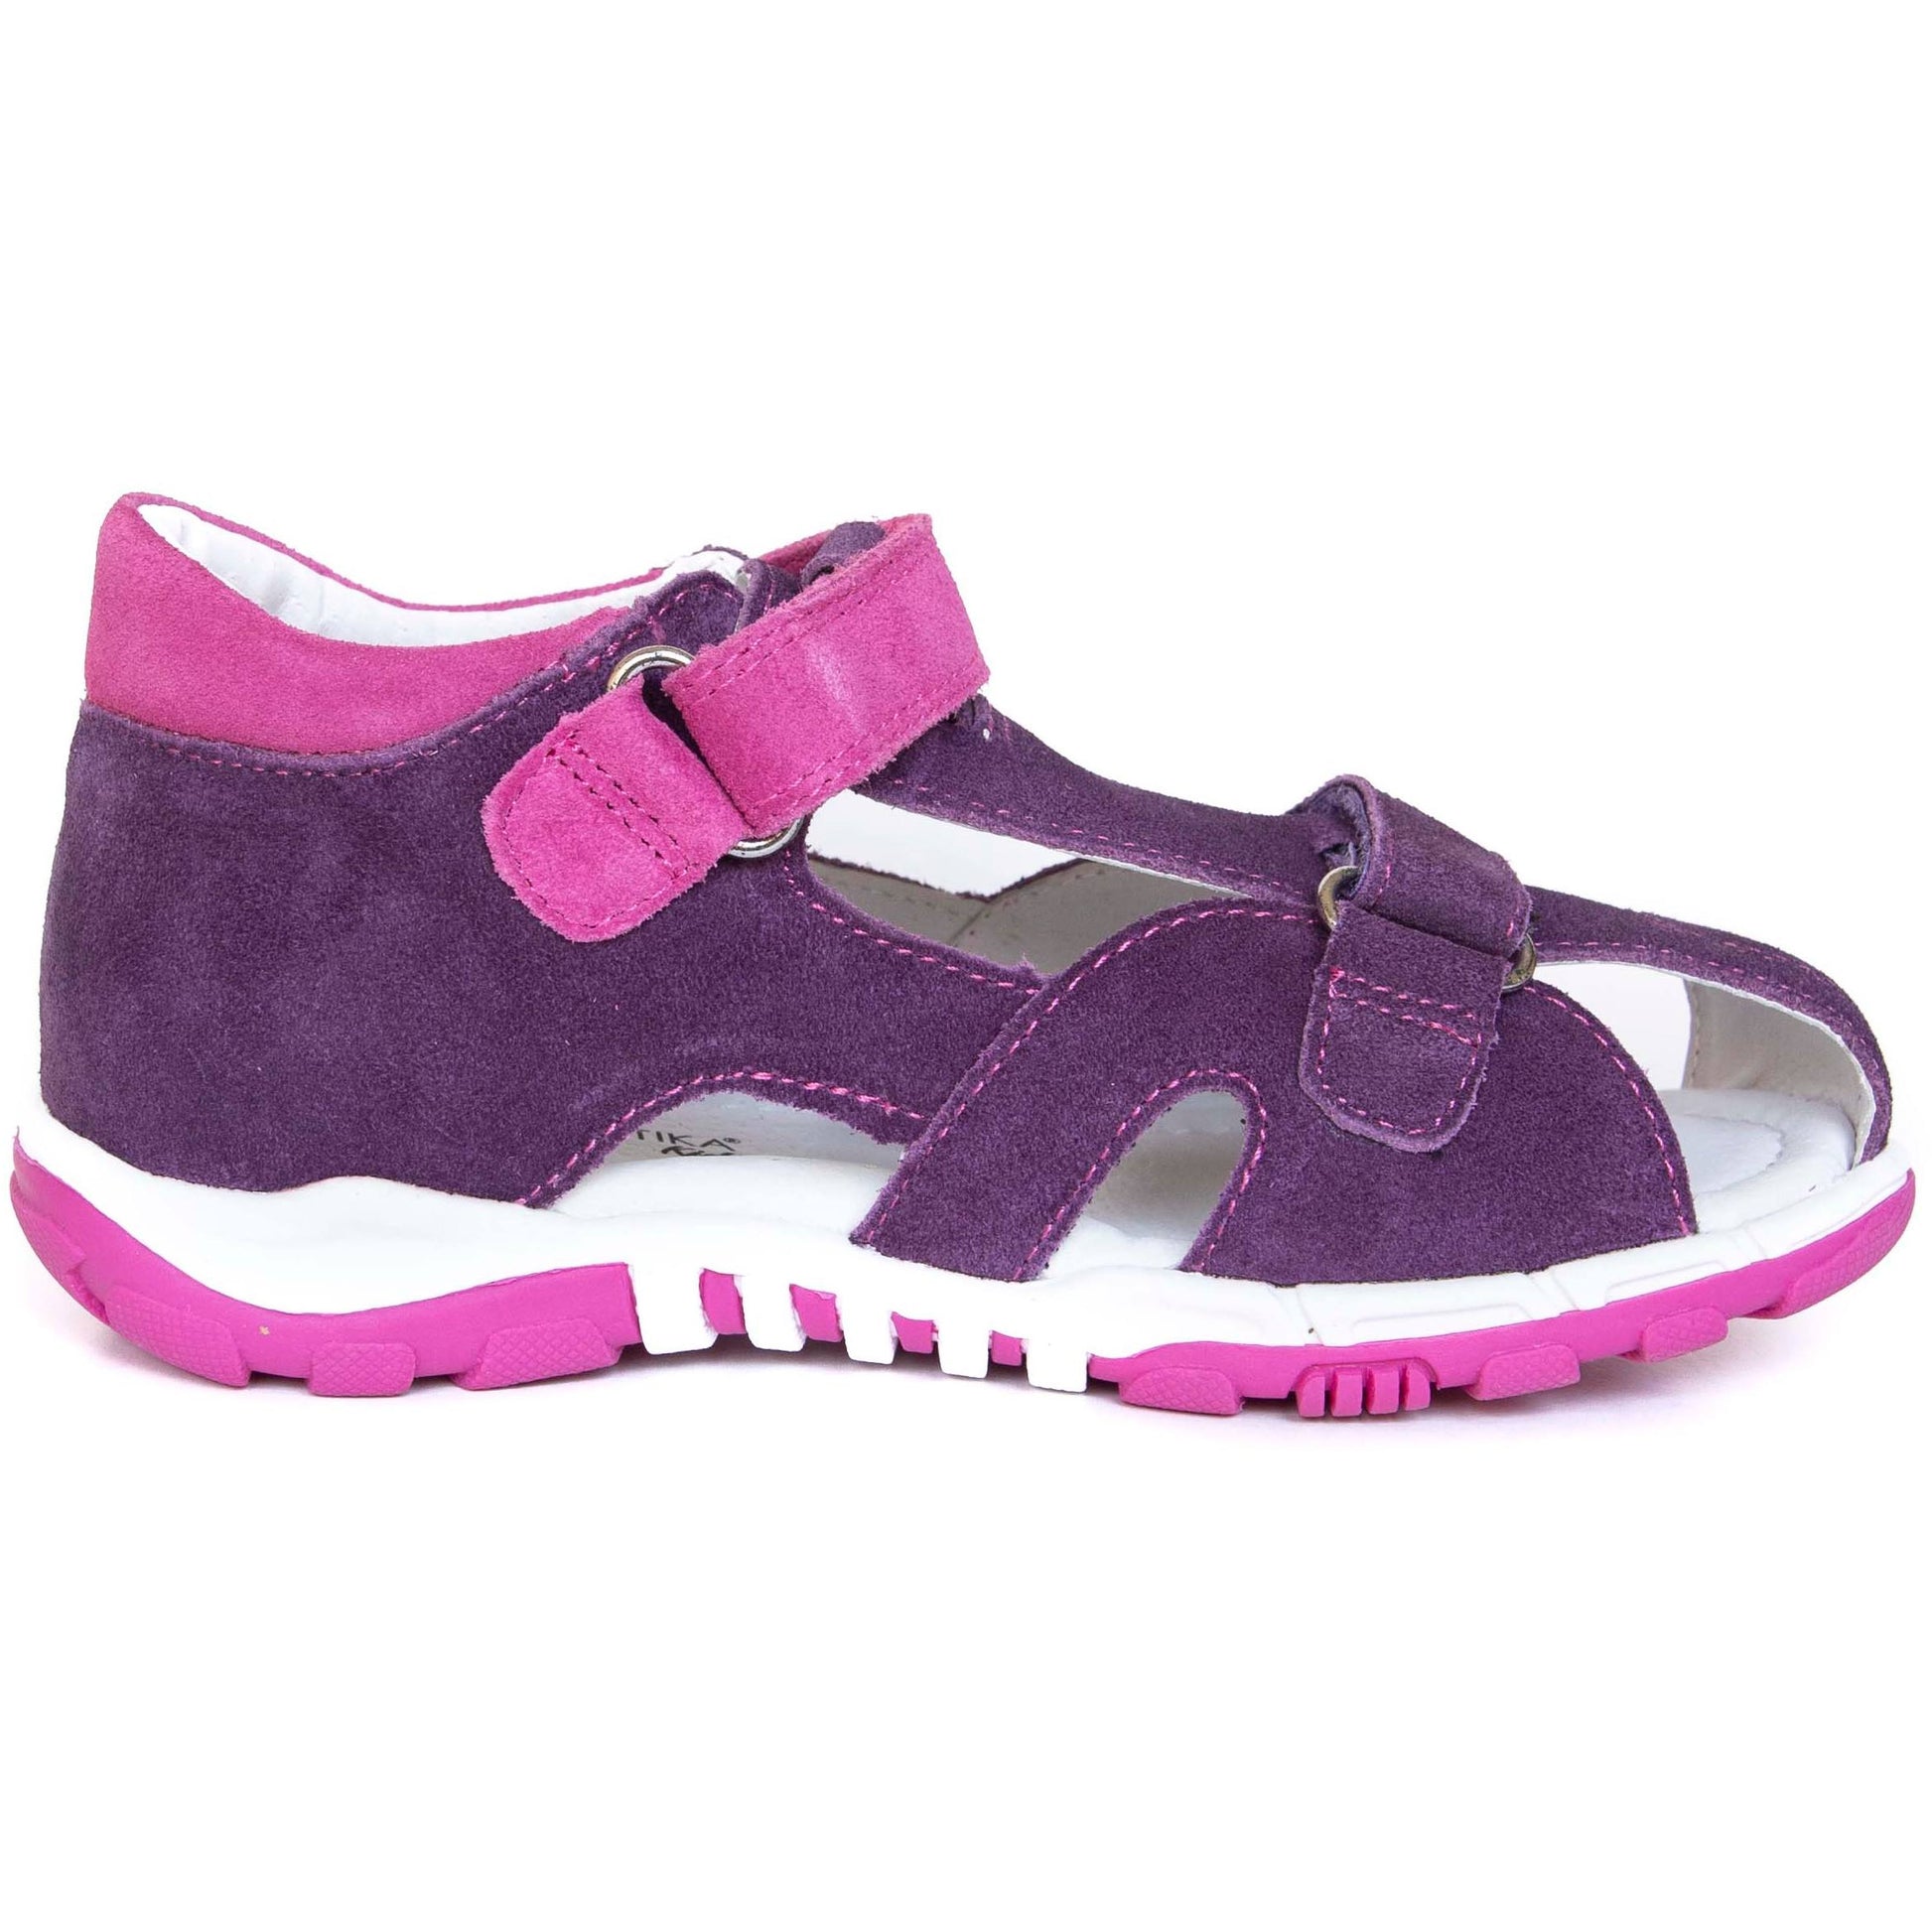 DARBY older girls arch support sandals - feelgoodshoes.ae